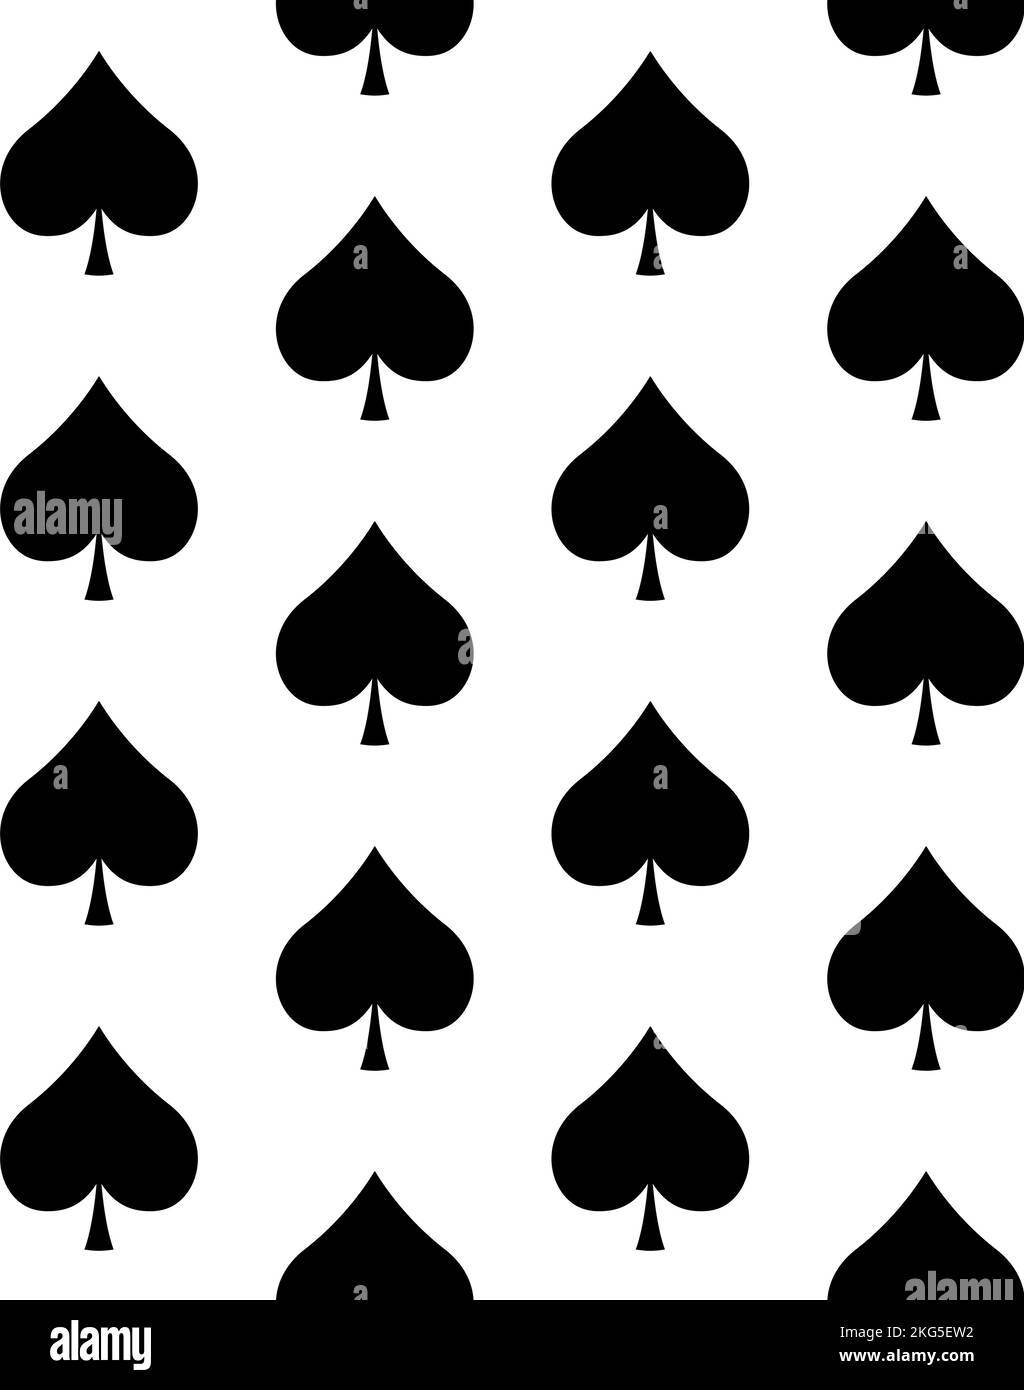 Vector seamless pattern of flat peak spades card sign isolated on white background Stock Vector